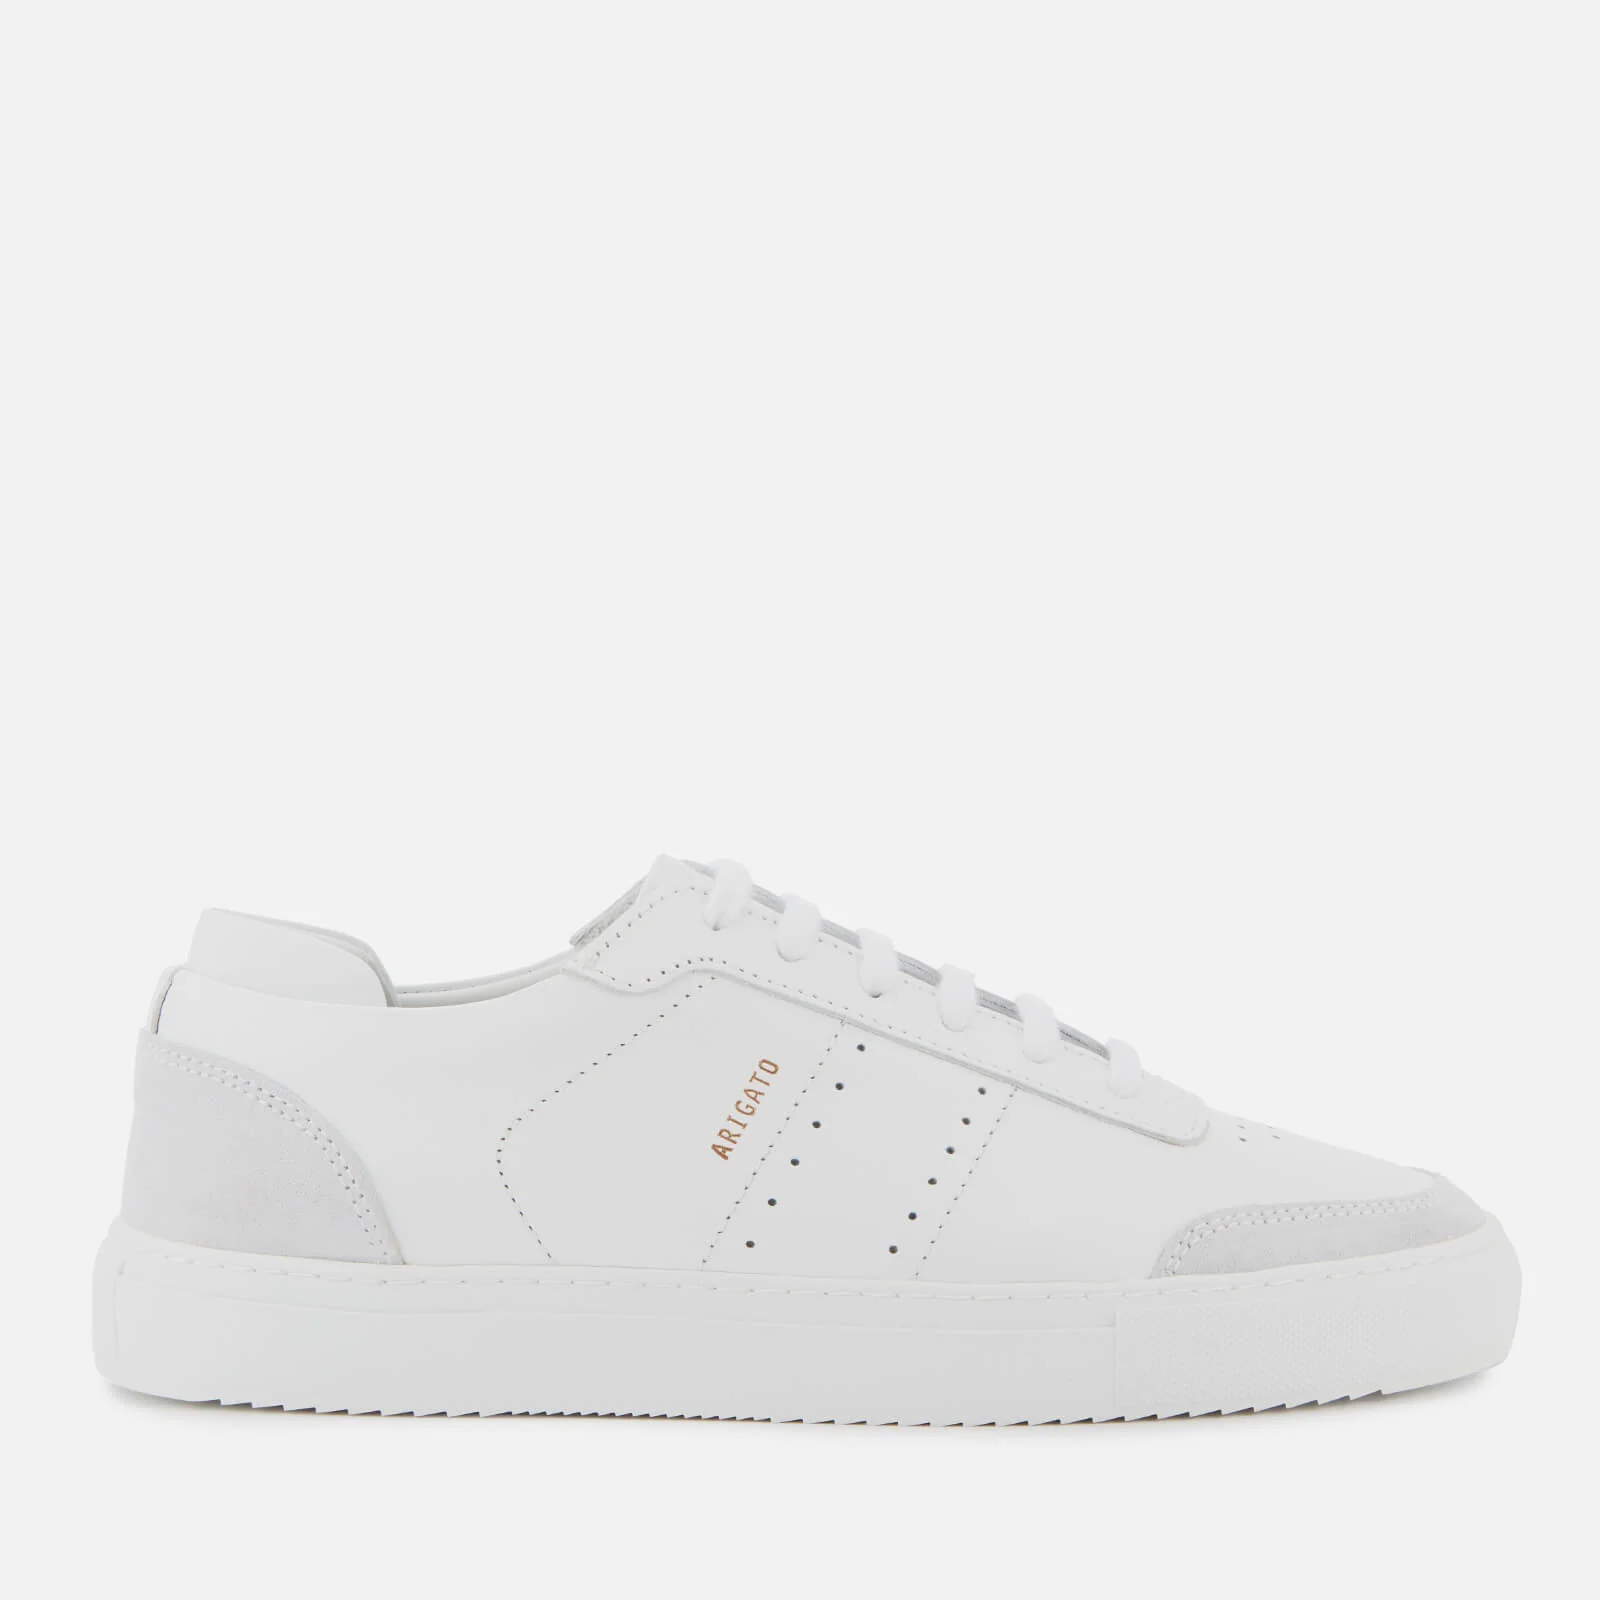 Axel Arigato Men's Dunk Leather Trainers - White Image 1